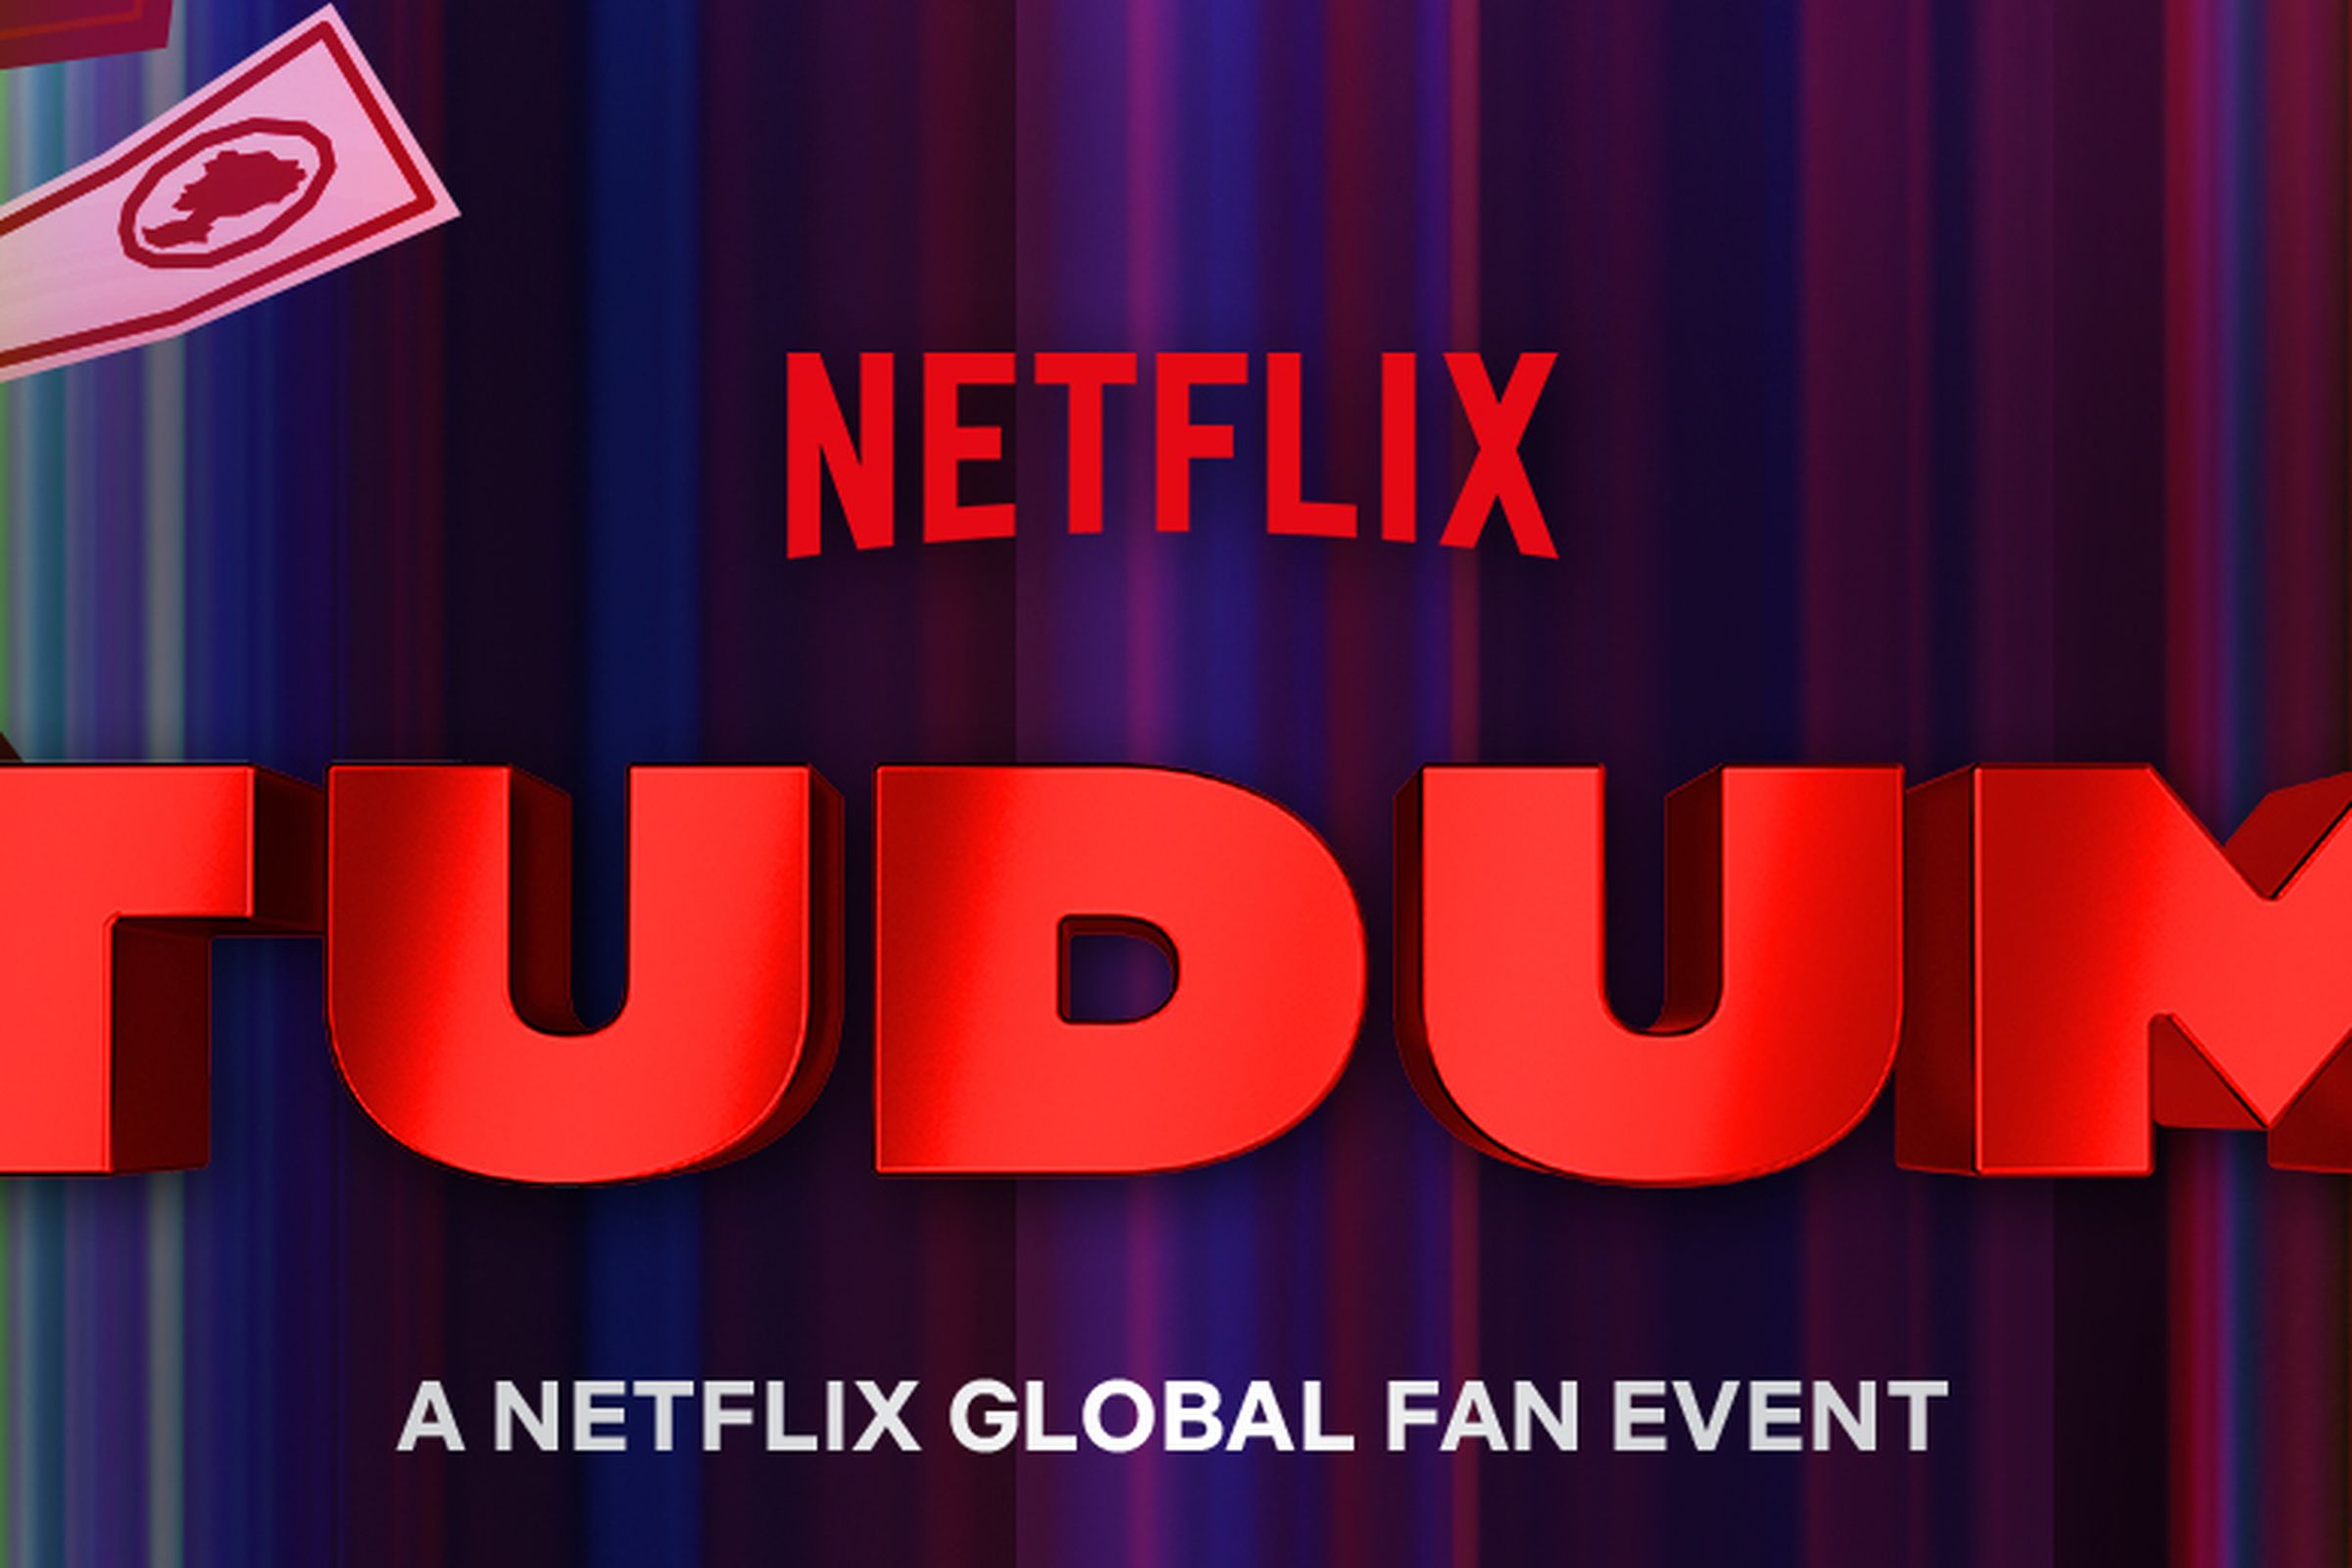 The Netflix logo and the Tudum logo, both of which are just the words “Netflix” and “Tudum” spelled out, along with clip art of a playing card and a character from Squid Game.